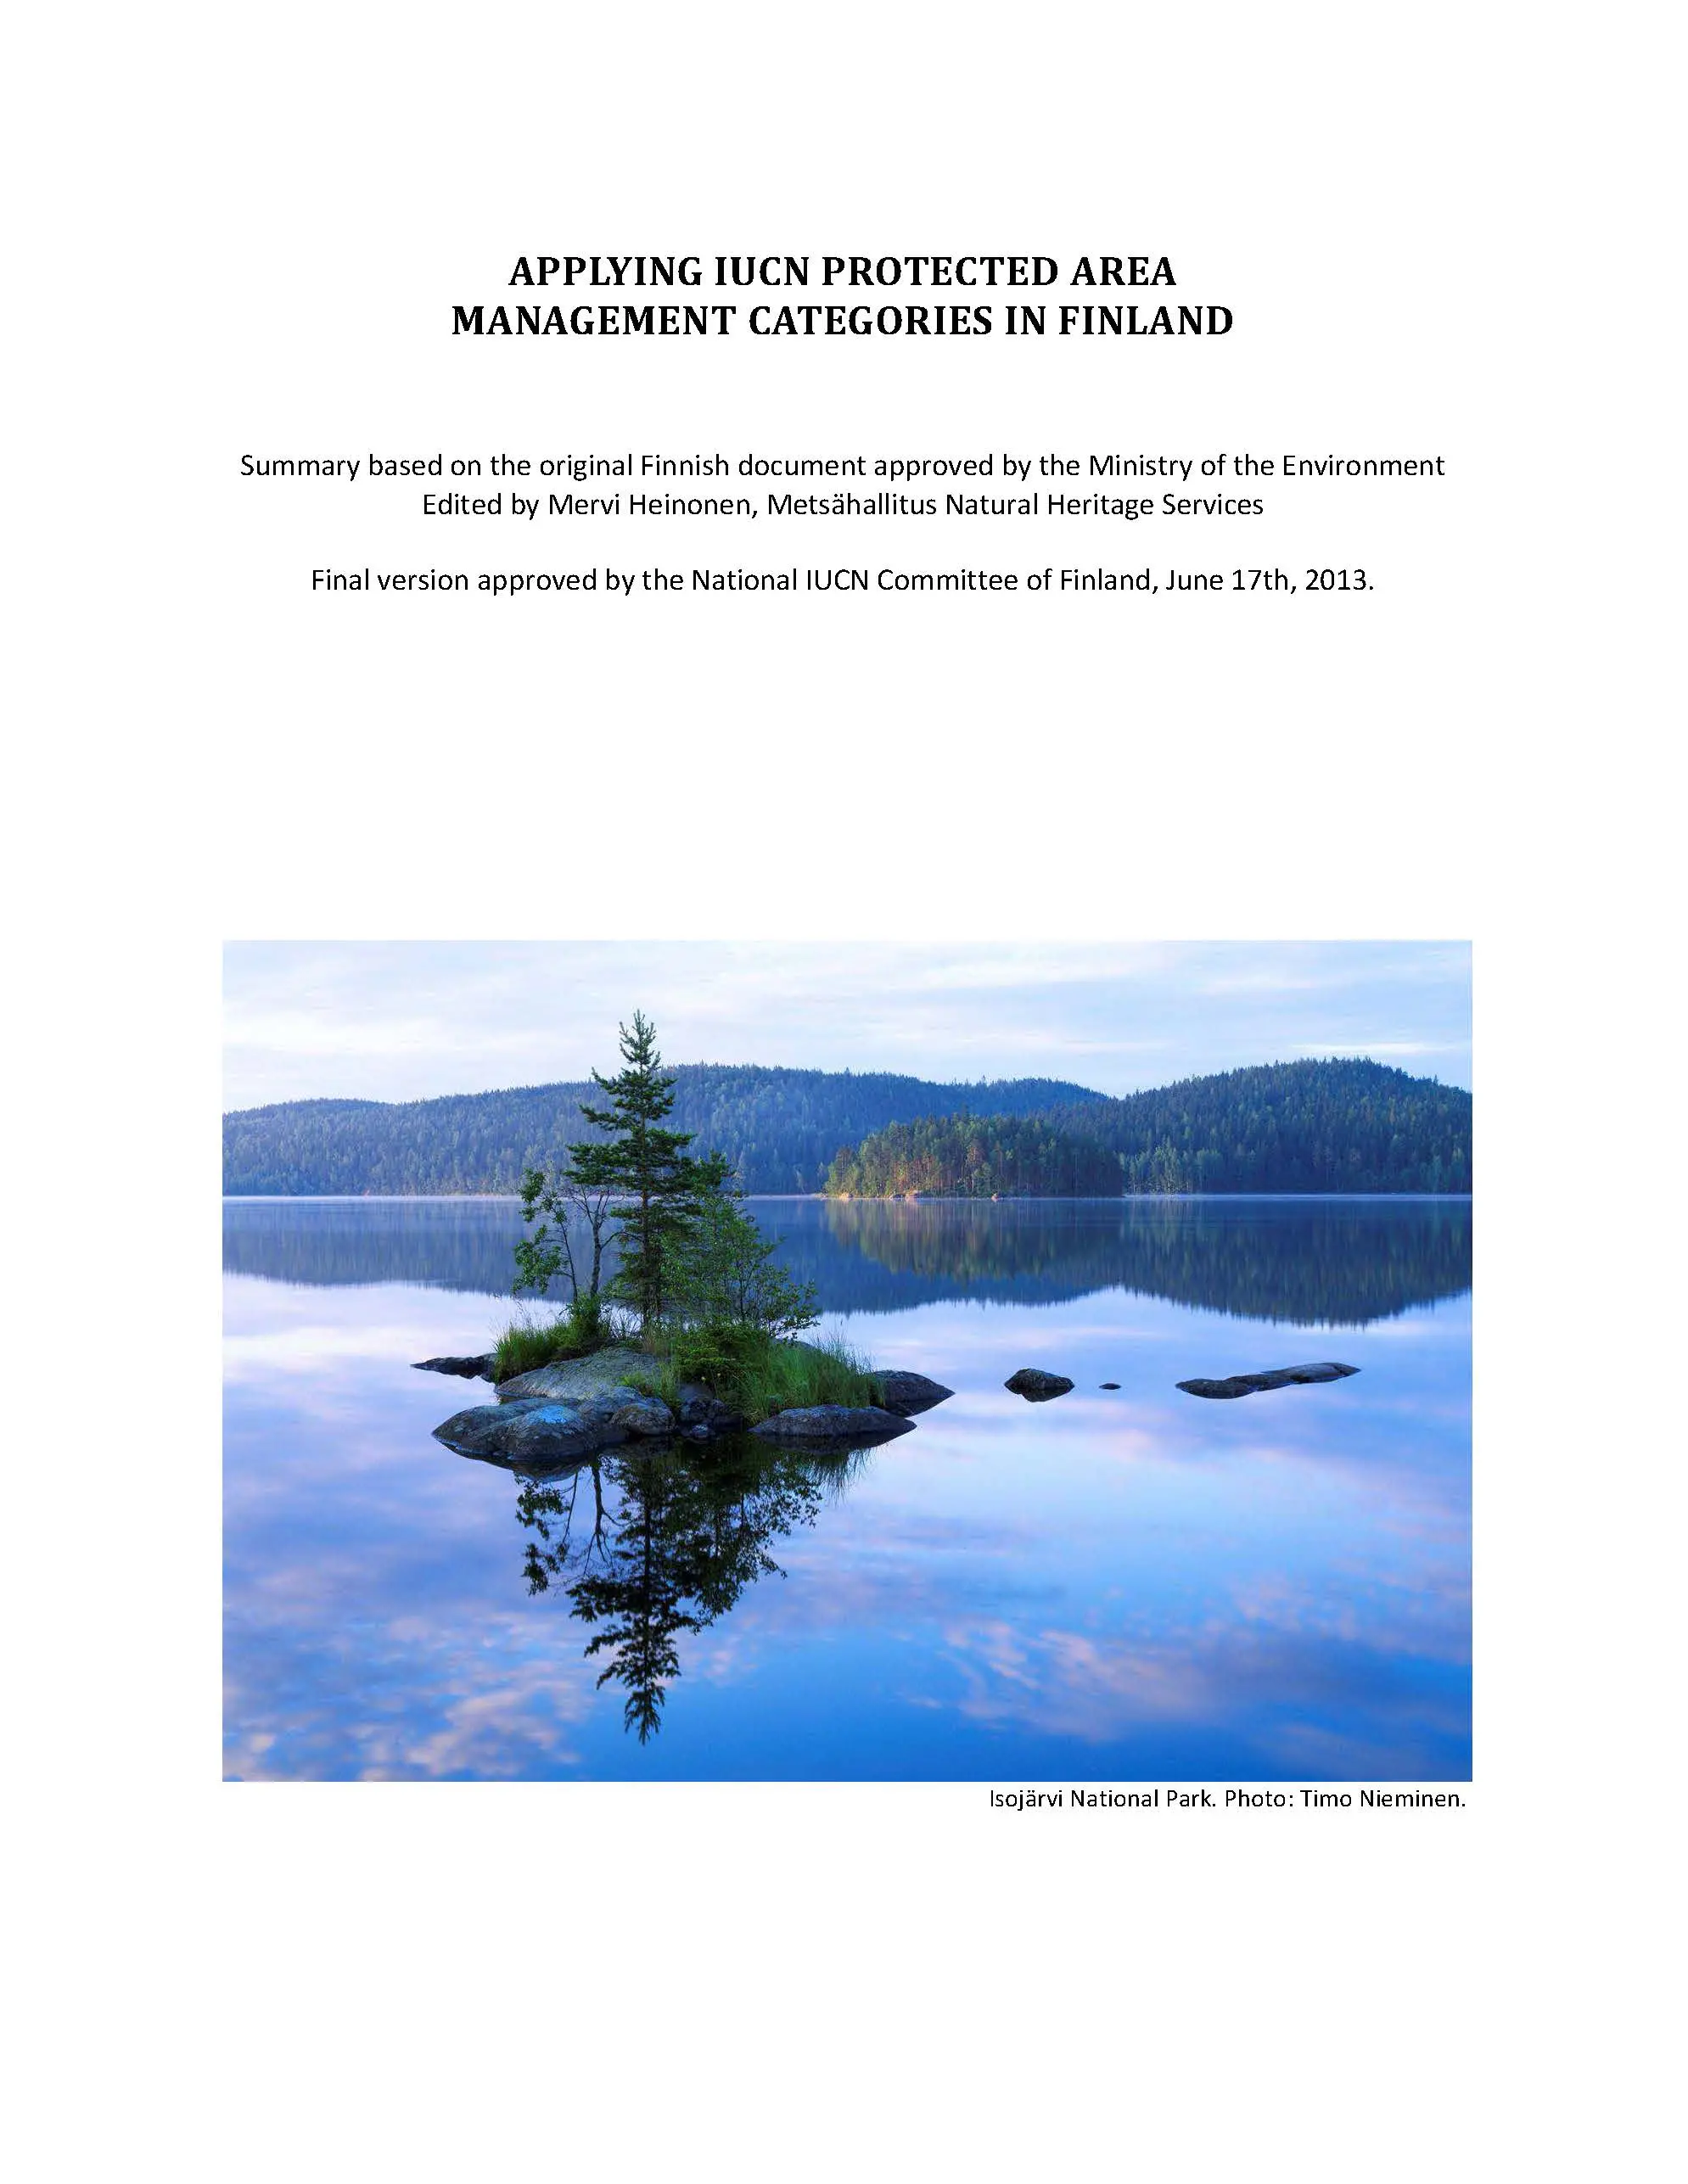 Applying IUCN Protected Area Management Categories in Finland